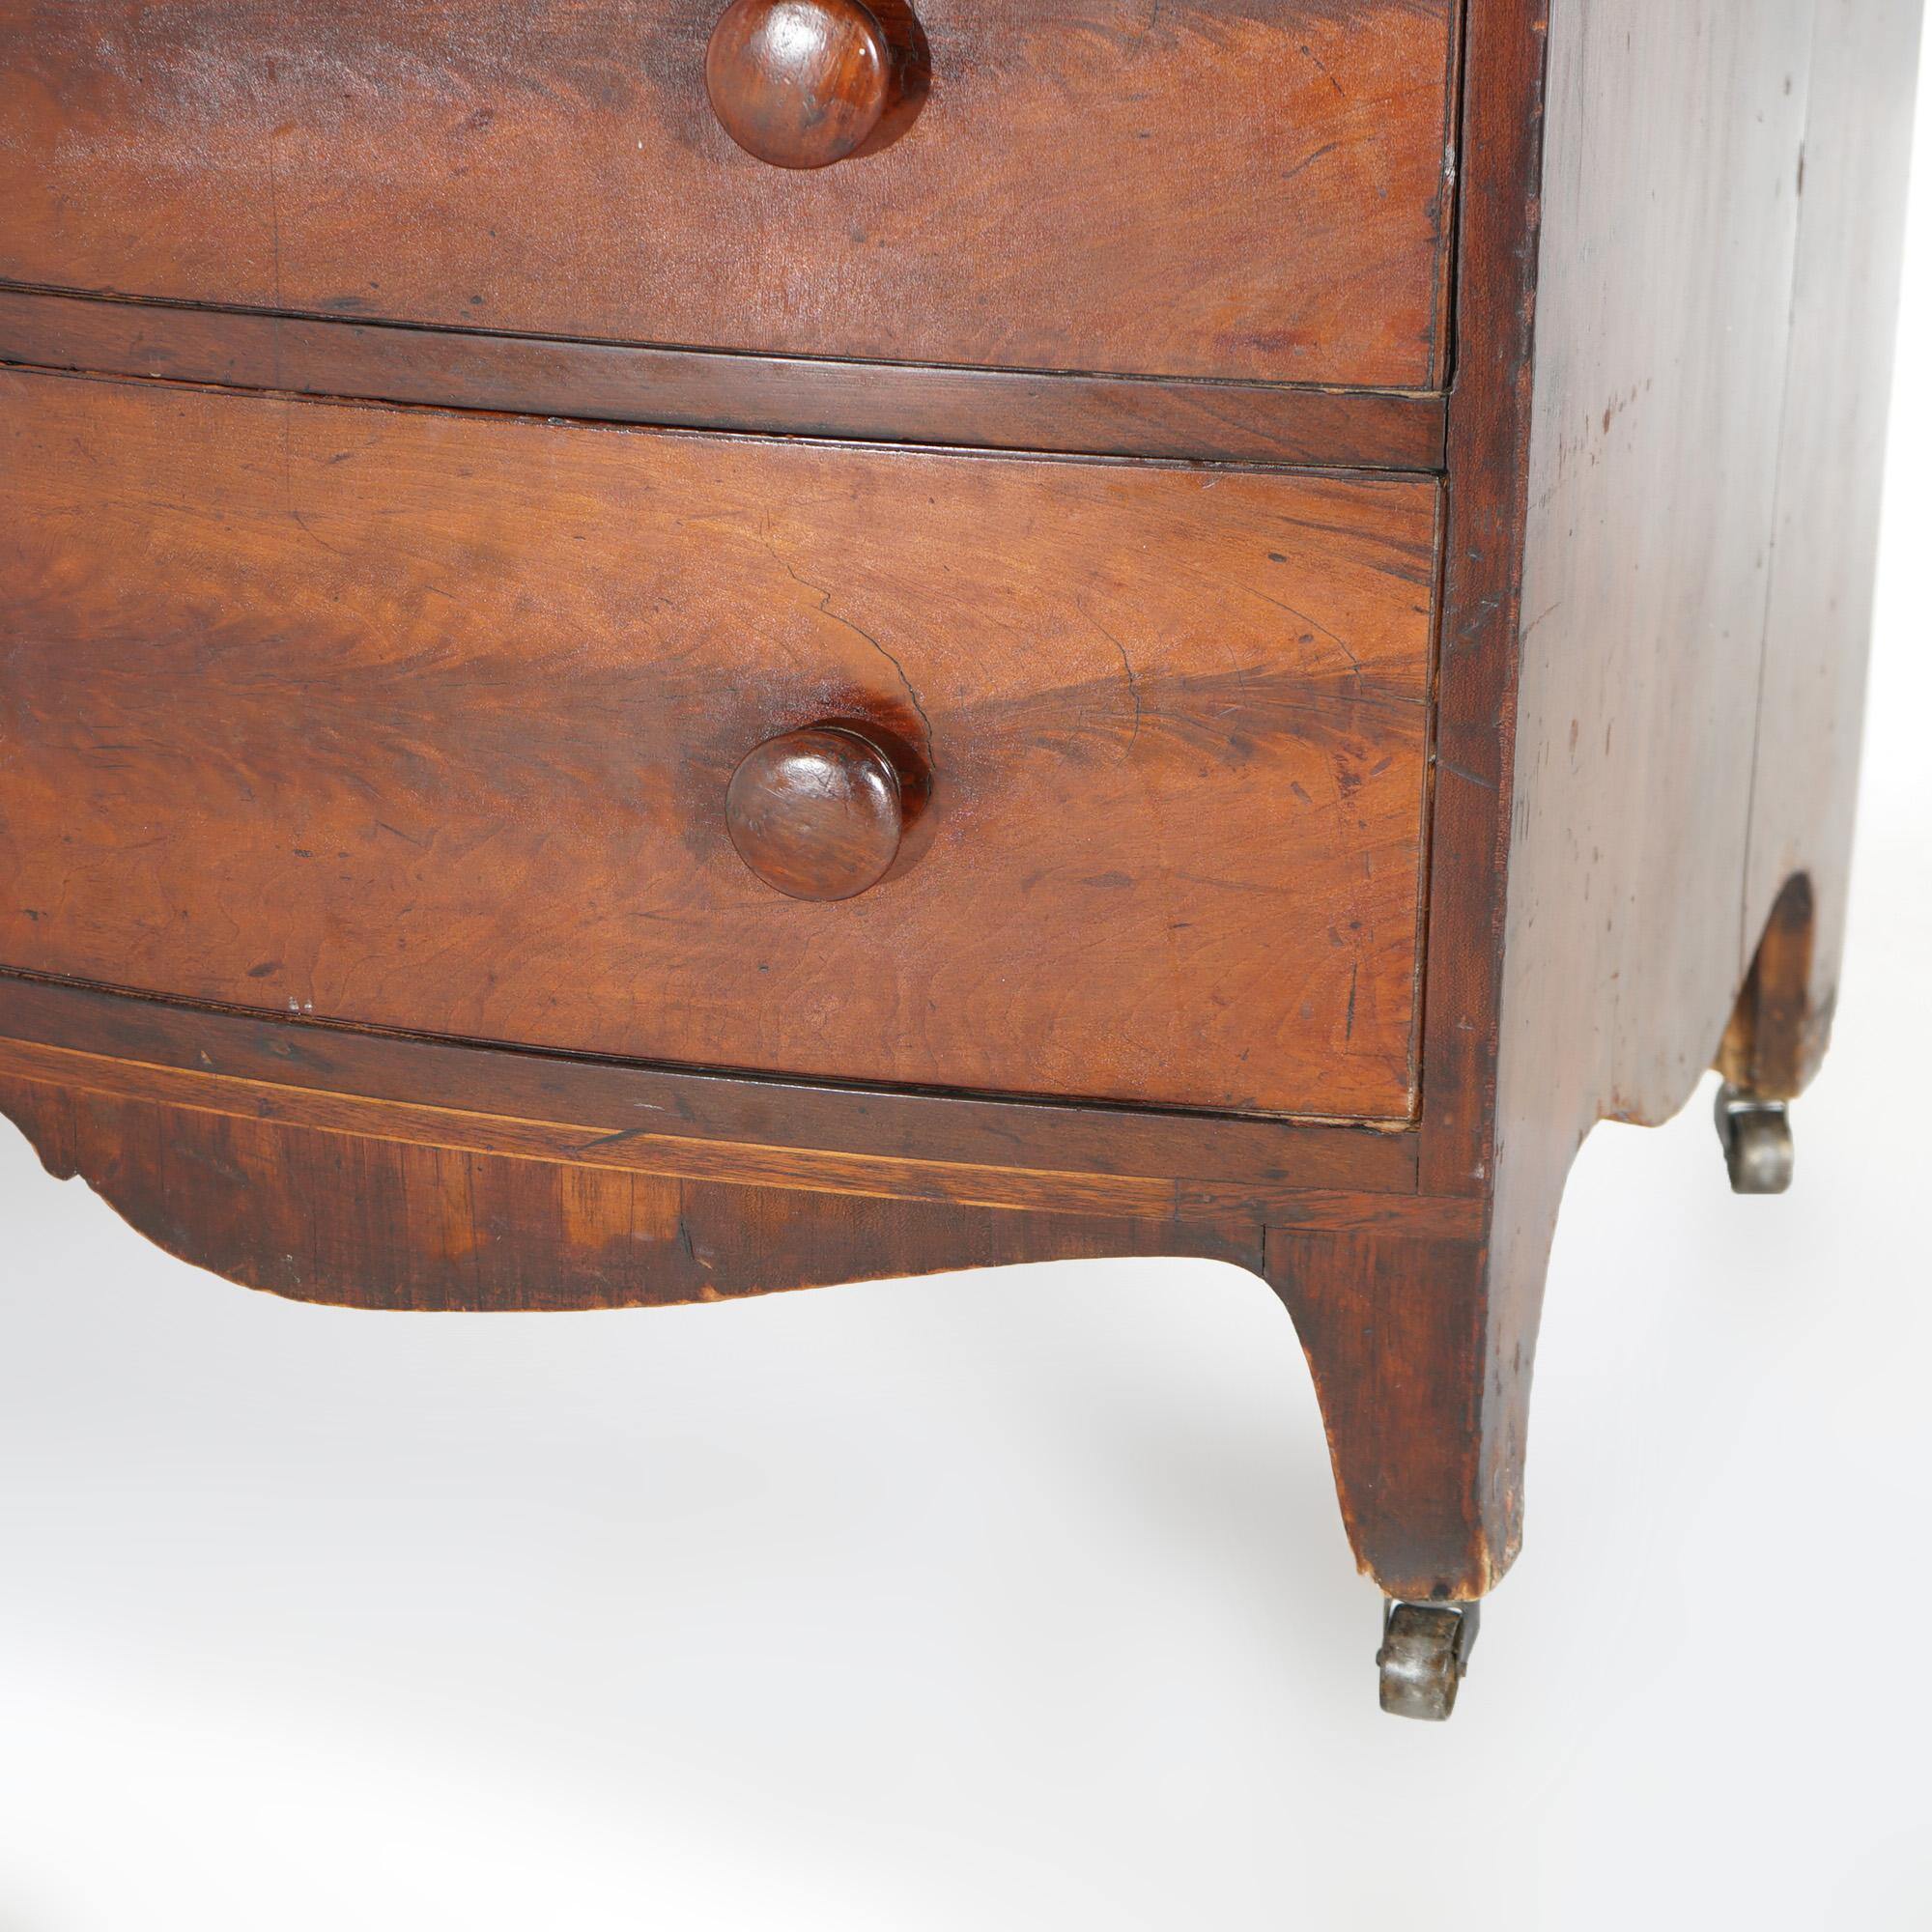 Antique Hepplewhite Flame Mahogany Bow Front Chest of Drawers c1830 1